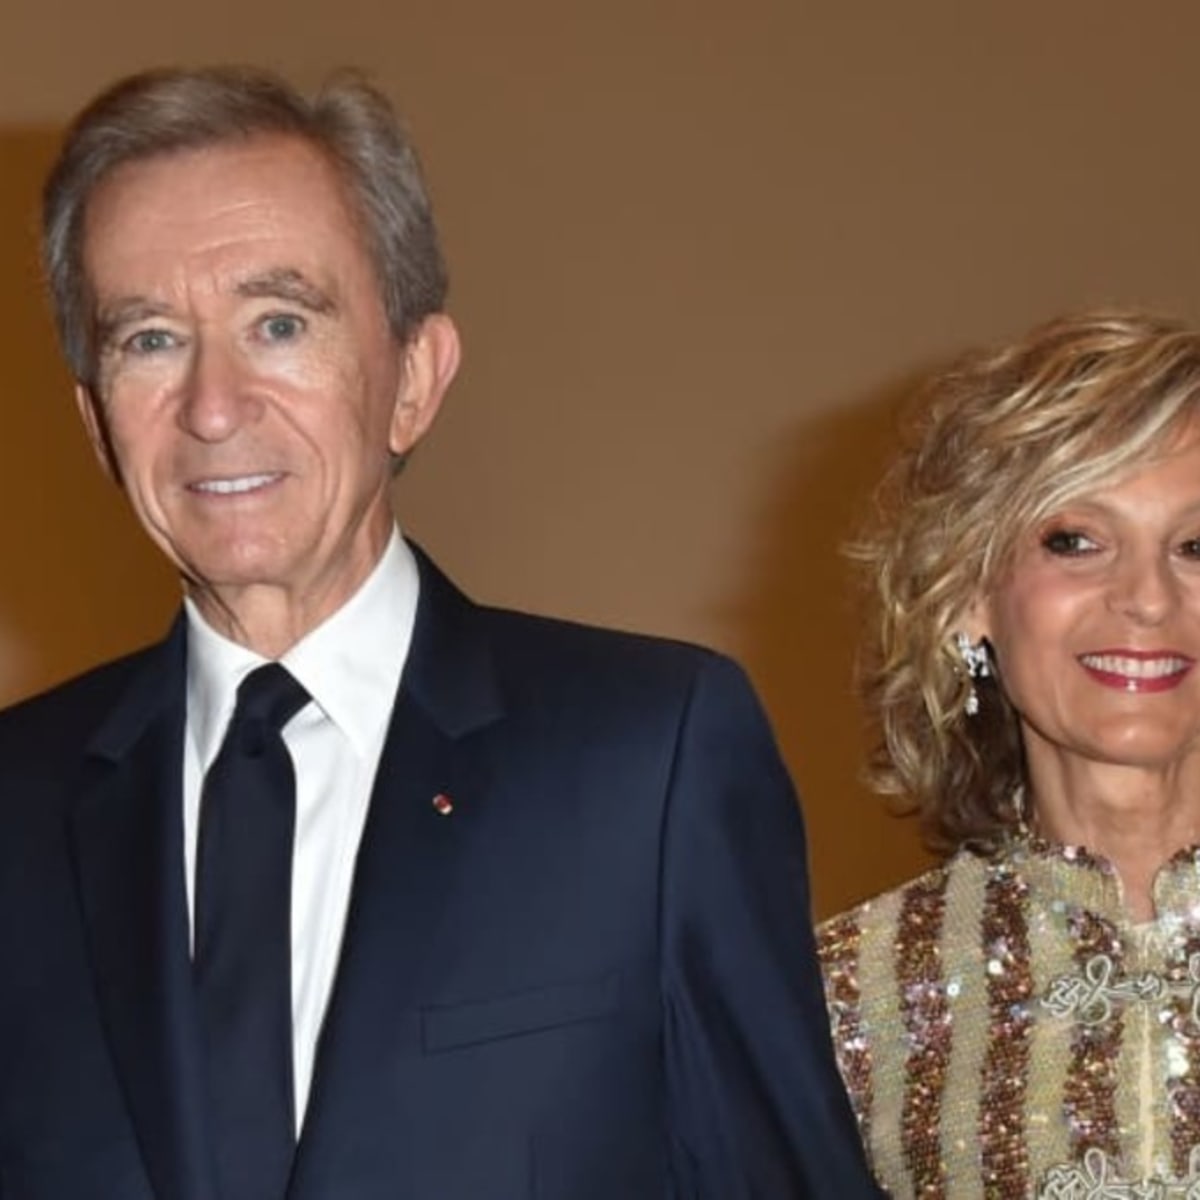 The most expensive things world's richest man Bernard Arnault owns